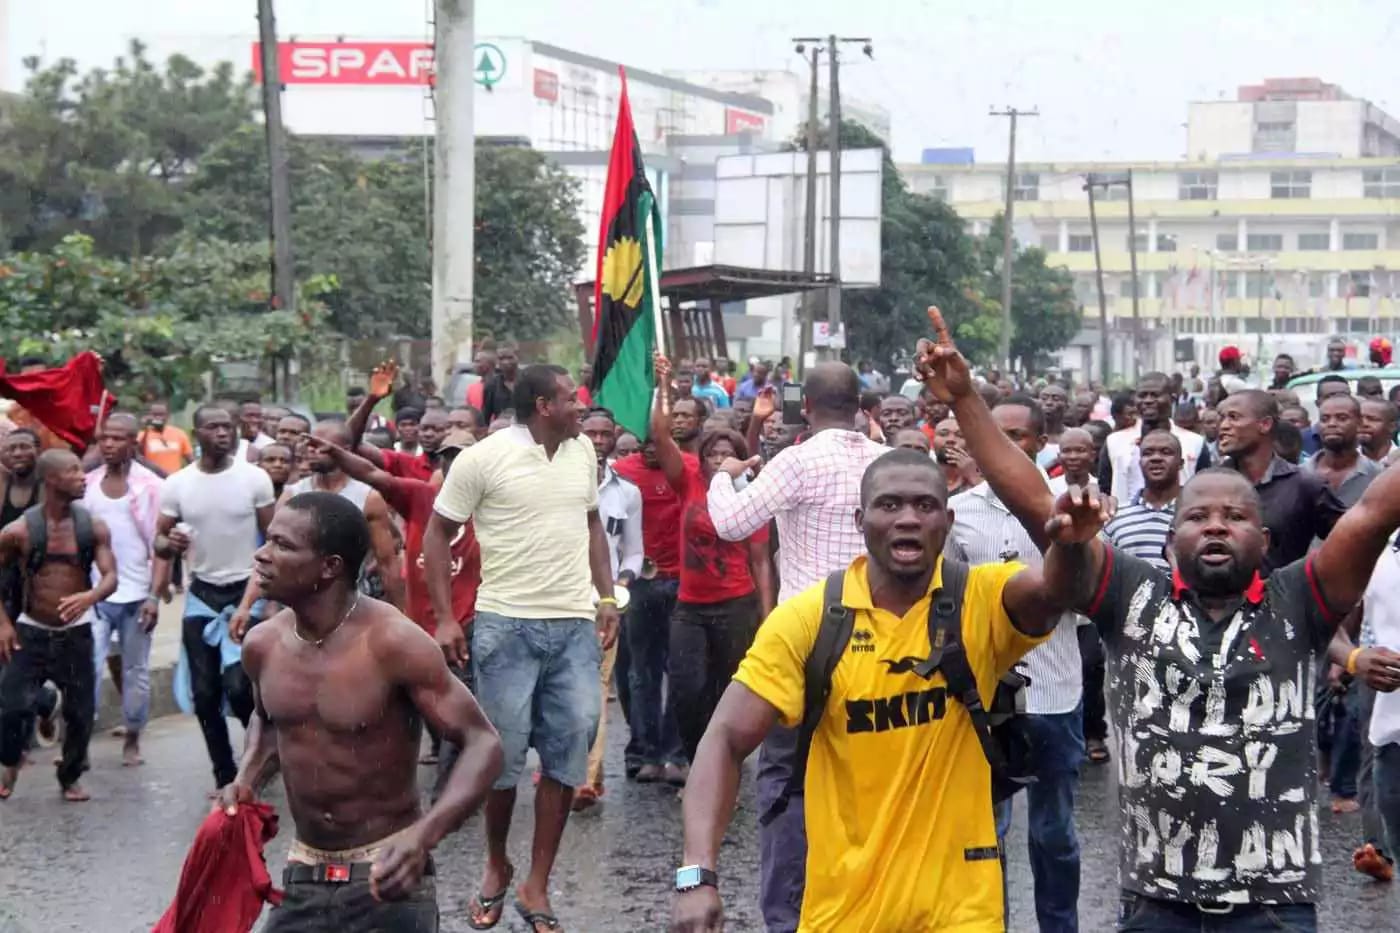 finally Ohanaeze Ndi Igbo speaks out on May 30 mass killings in the south east.see what they said